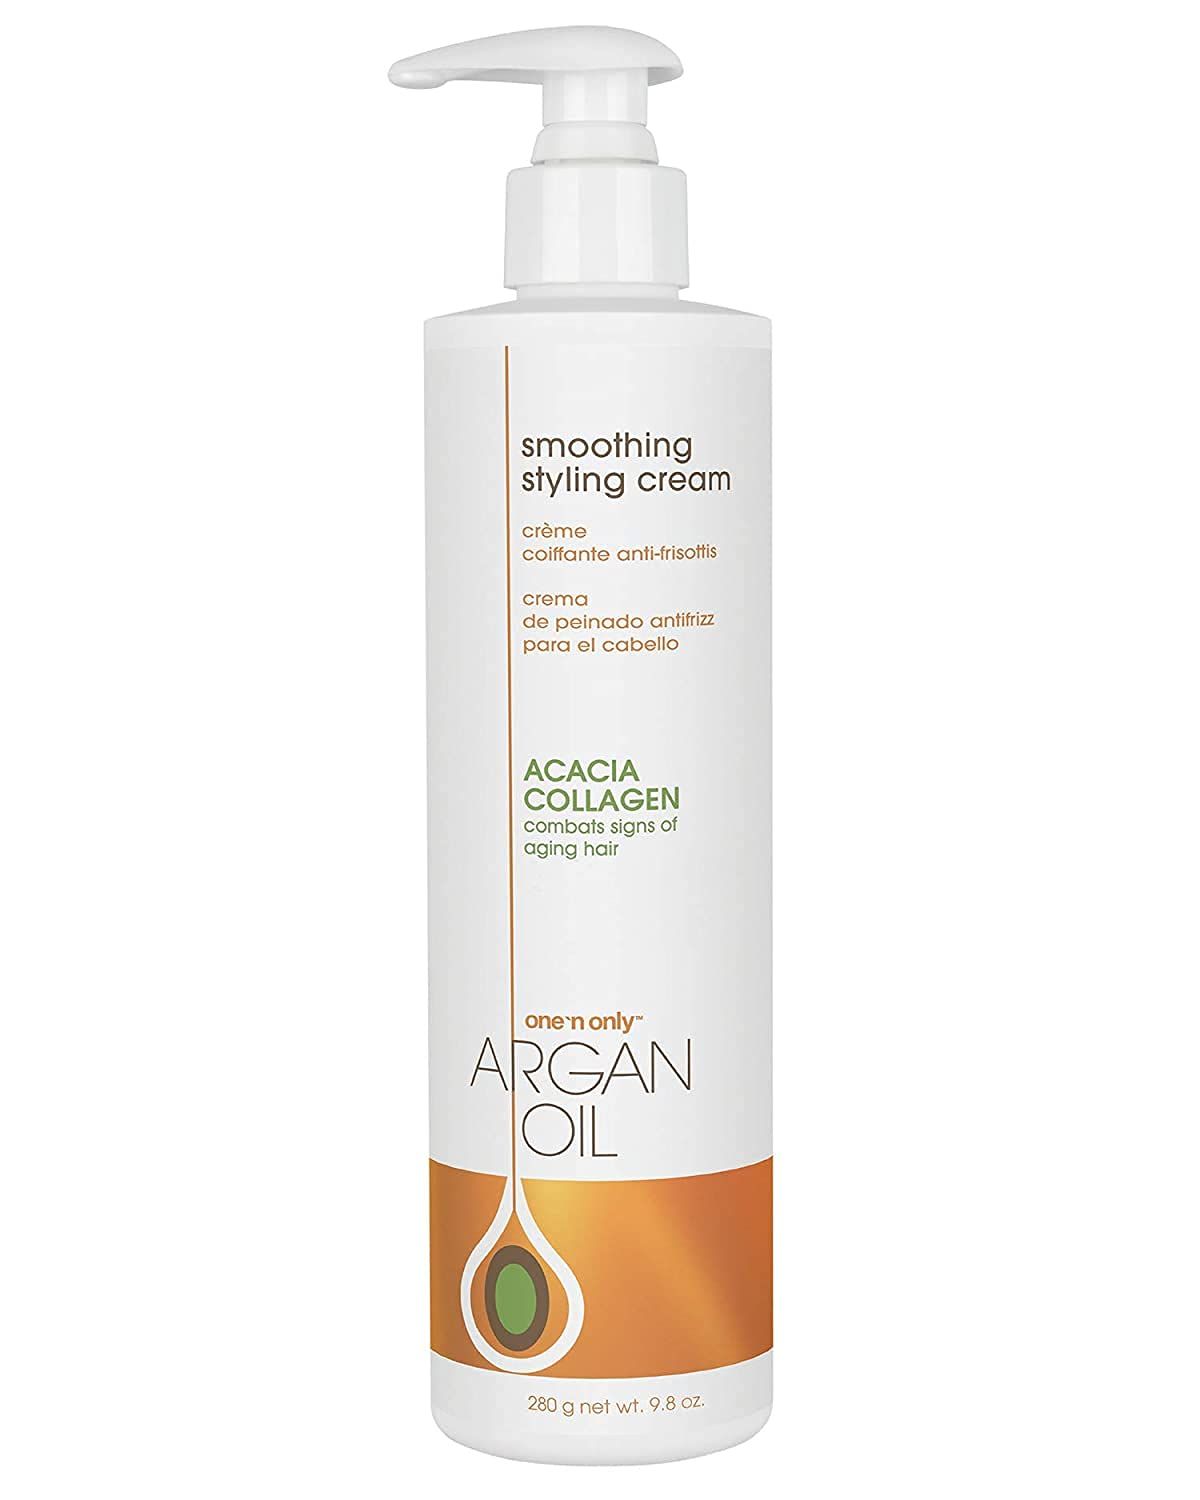 ONE 'N ONLY Argan Oil Styling Cream HP-539414 | Amazon (US)